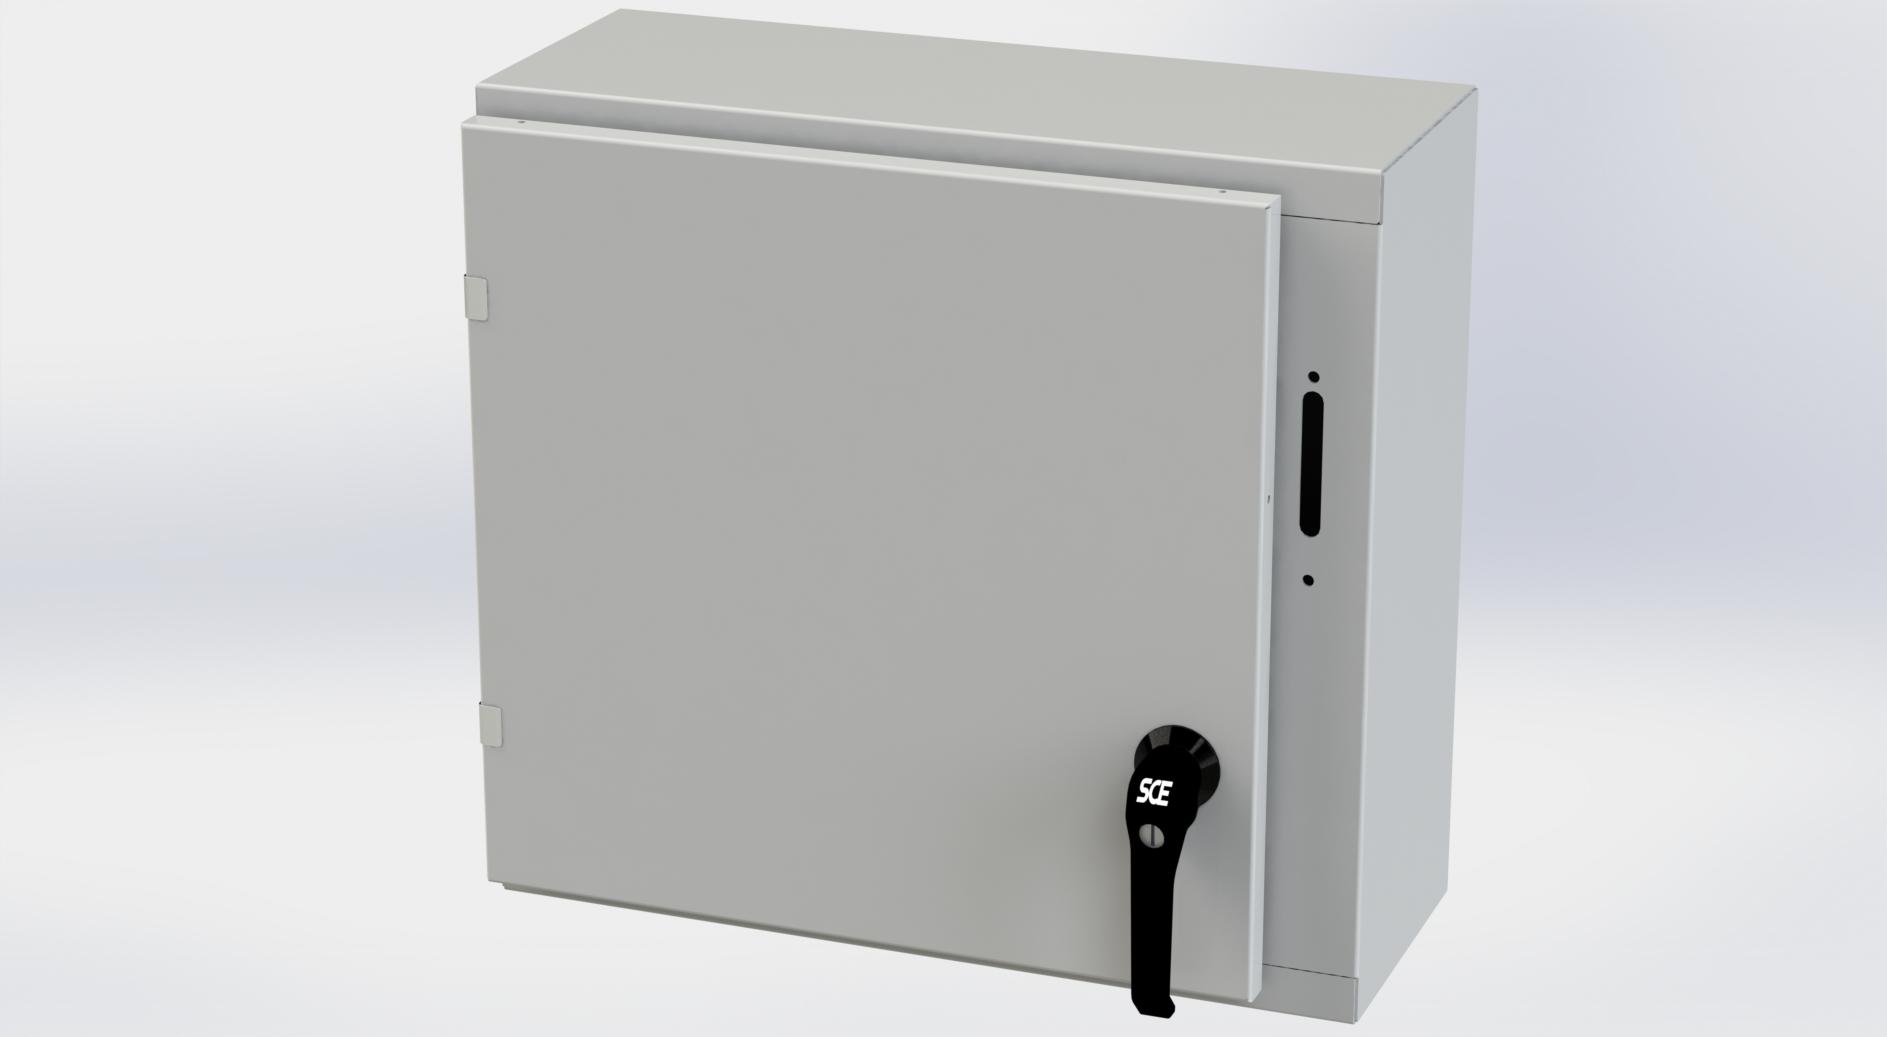 Saginaw Control SCE-20XEL2108LPLG XEL LP Enclosure, Height:20.00", Width:21.38", Depth:8.00", RAL 7035 gray powder coating inside and out. Optional sub-panels are powder coated white.